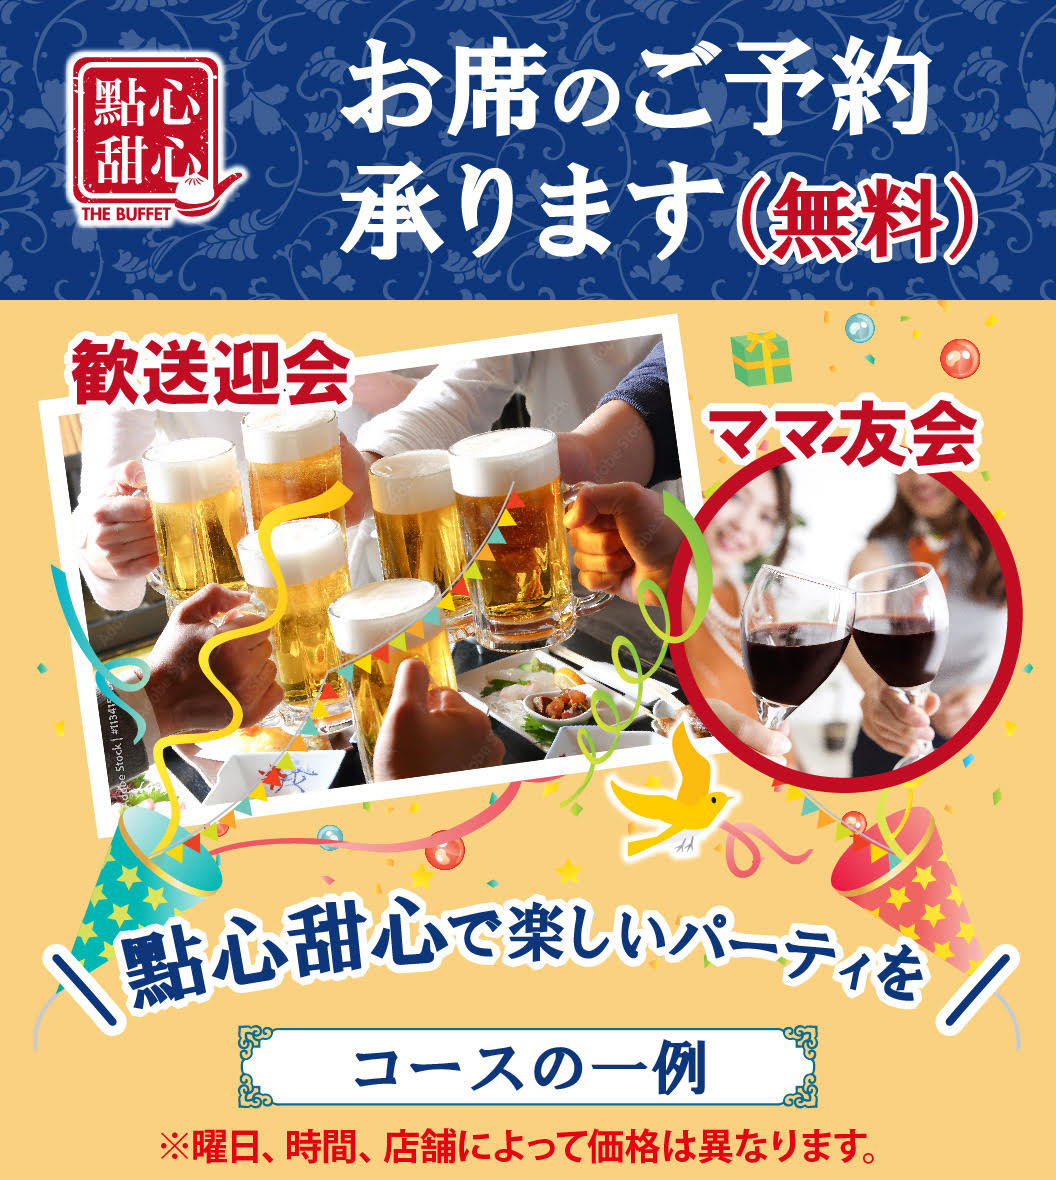 We accept reservations. Reservations are free. Perfect for welcoming and farewell parties, or get-togethers with moms! Have a fun party at Tenshin Tenshin（點心甜心）!